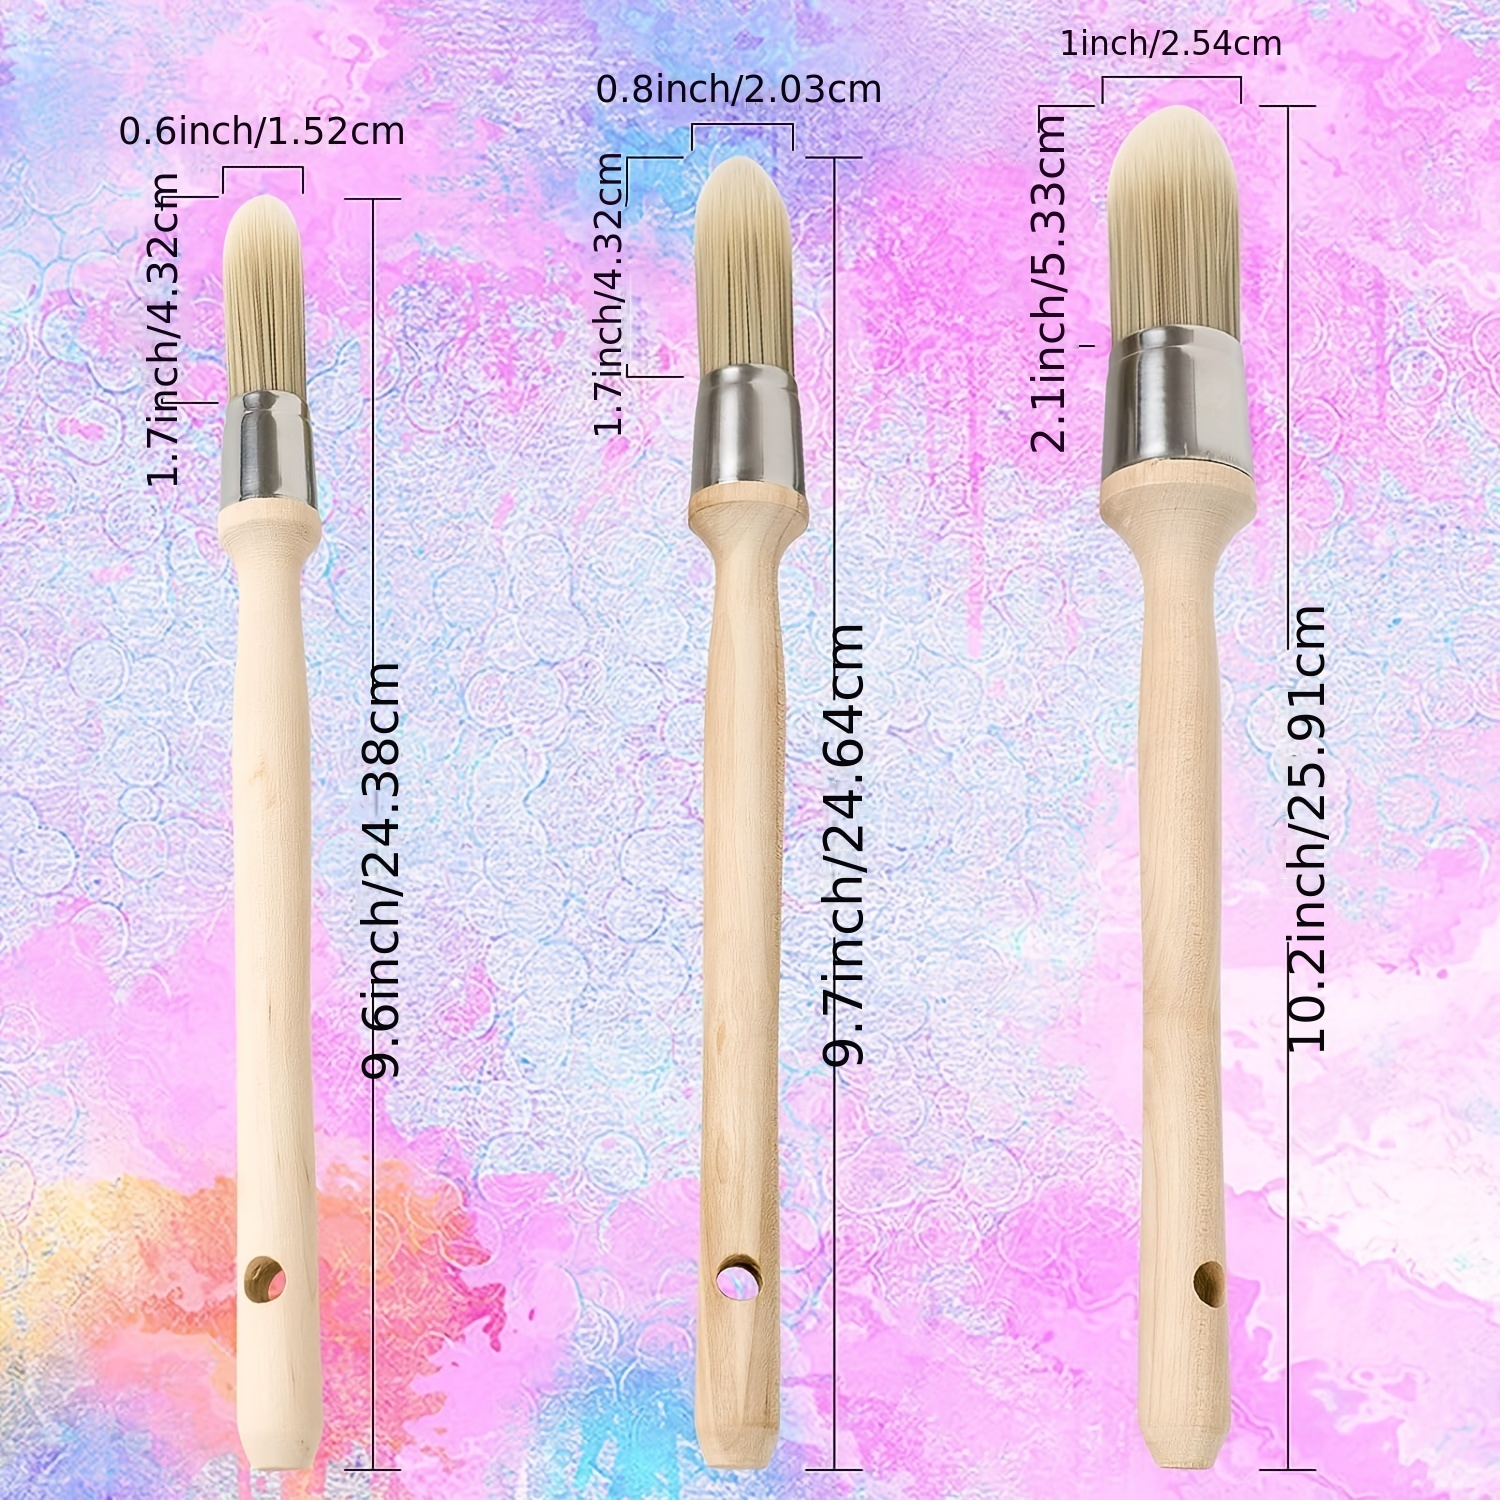 HOT-Trim Painting Tool,4 X Small Paint Brush For Touch Ups And 1 X